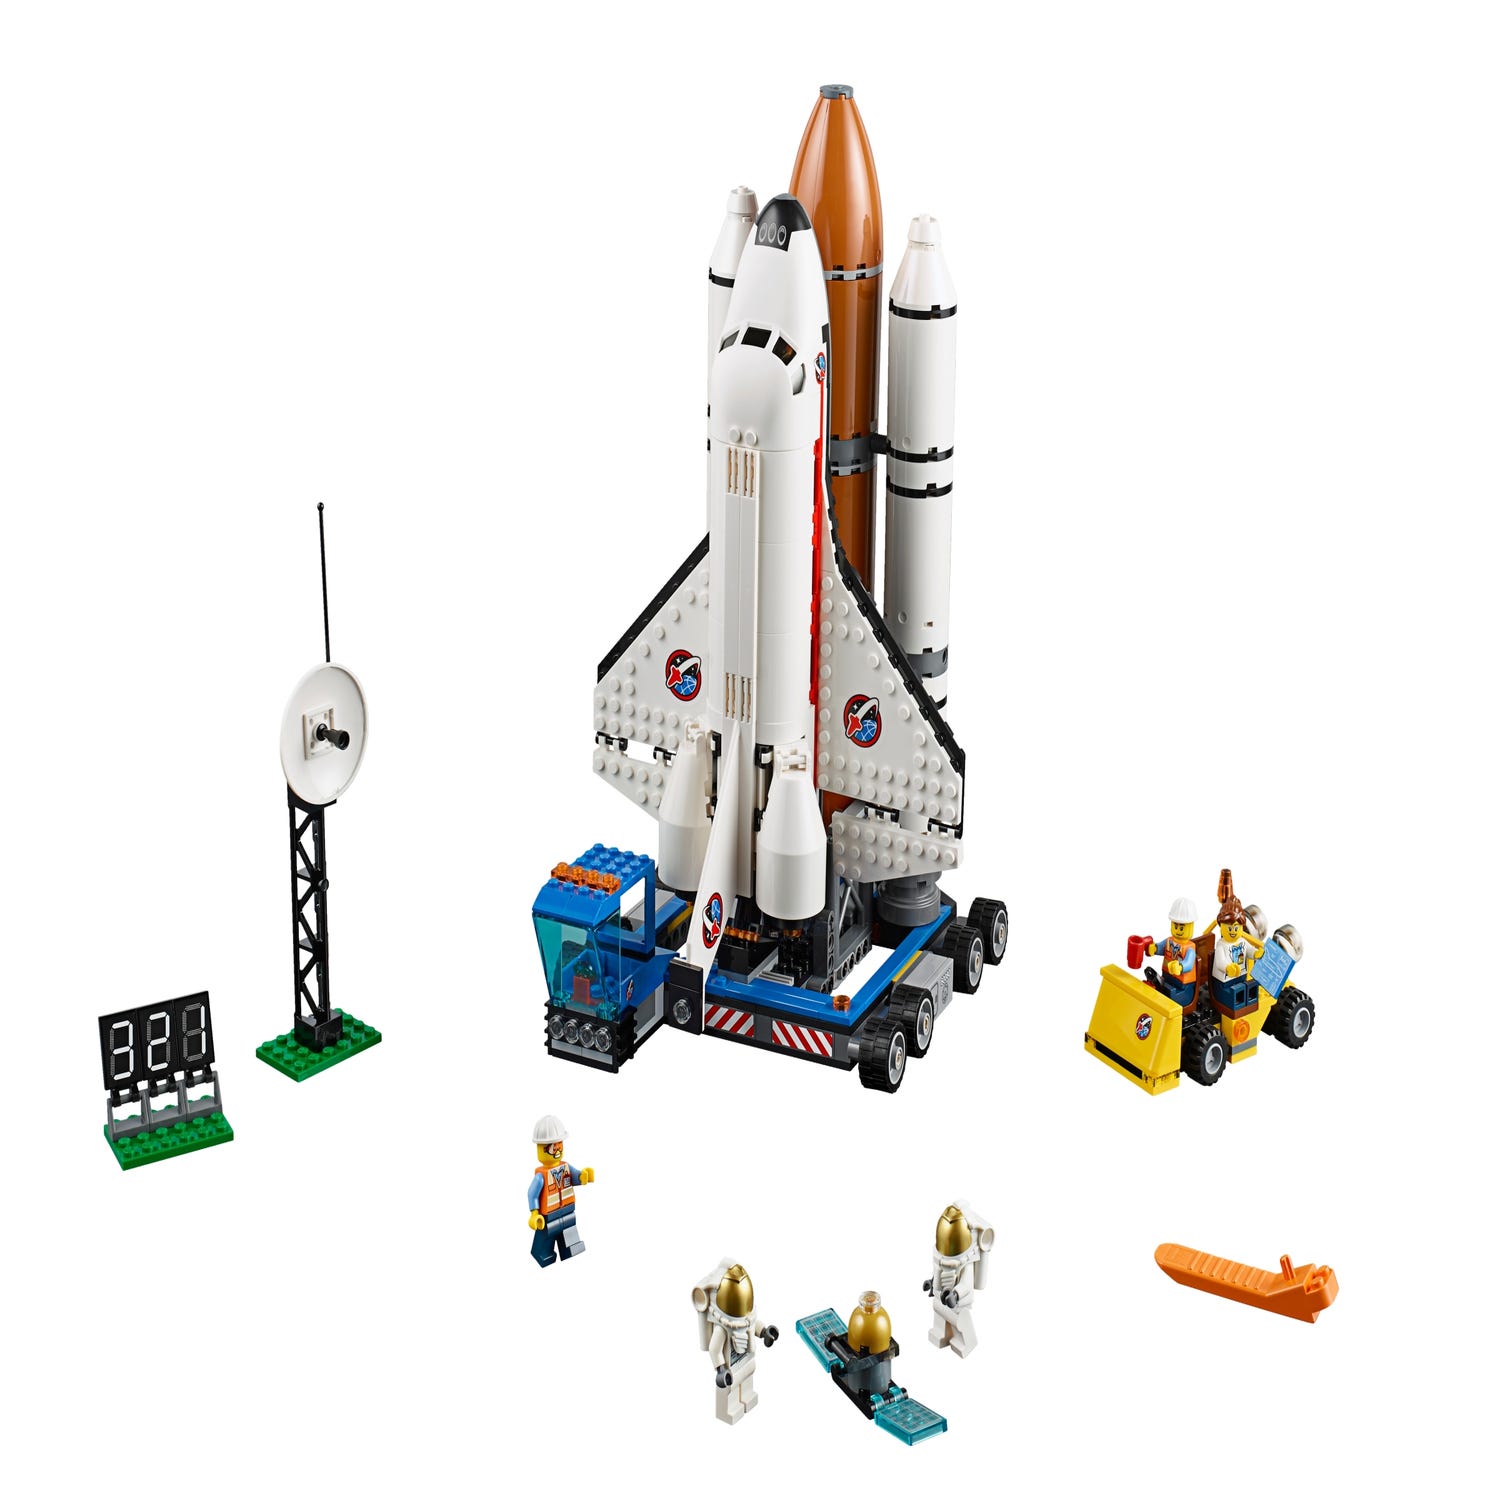 Spaceport 60080 | City | Buy online at the Official LEGO® Shop US